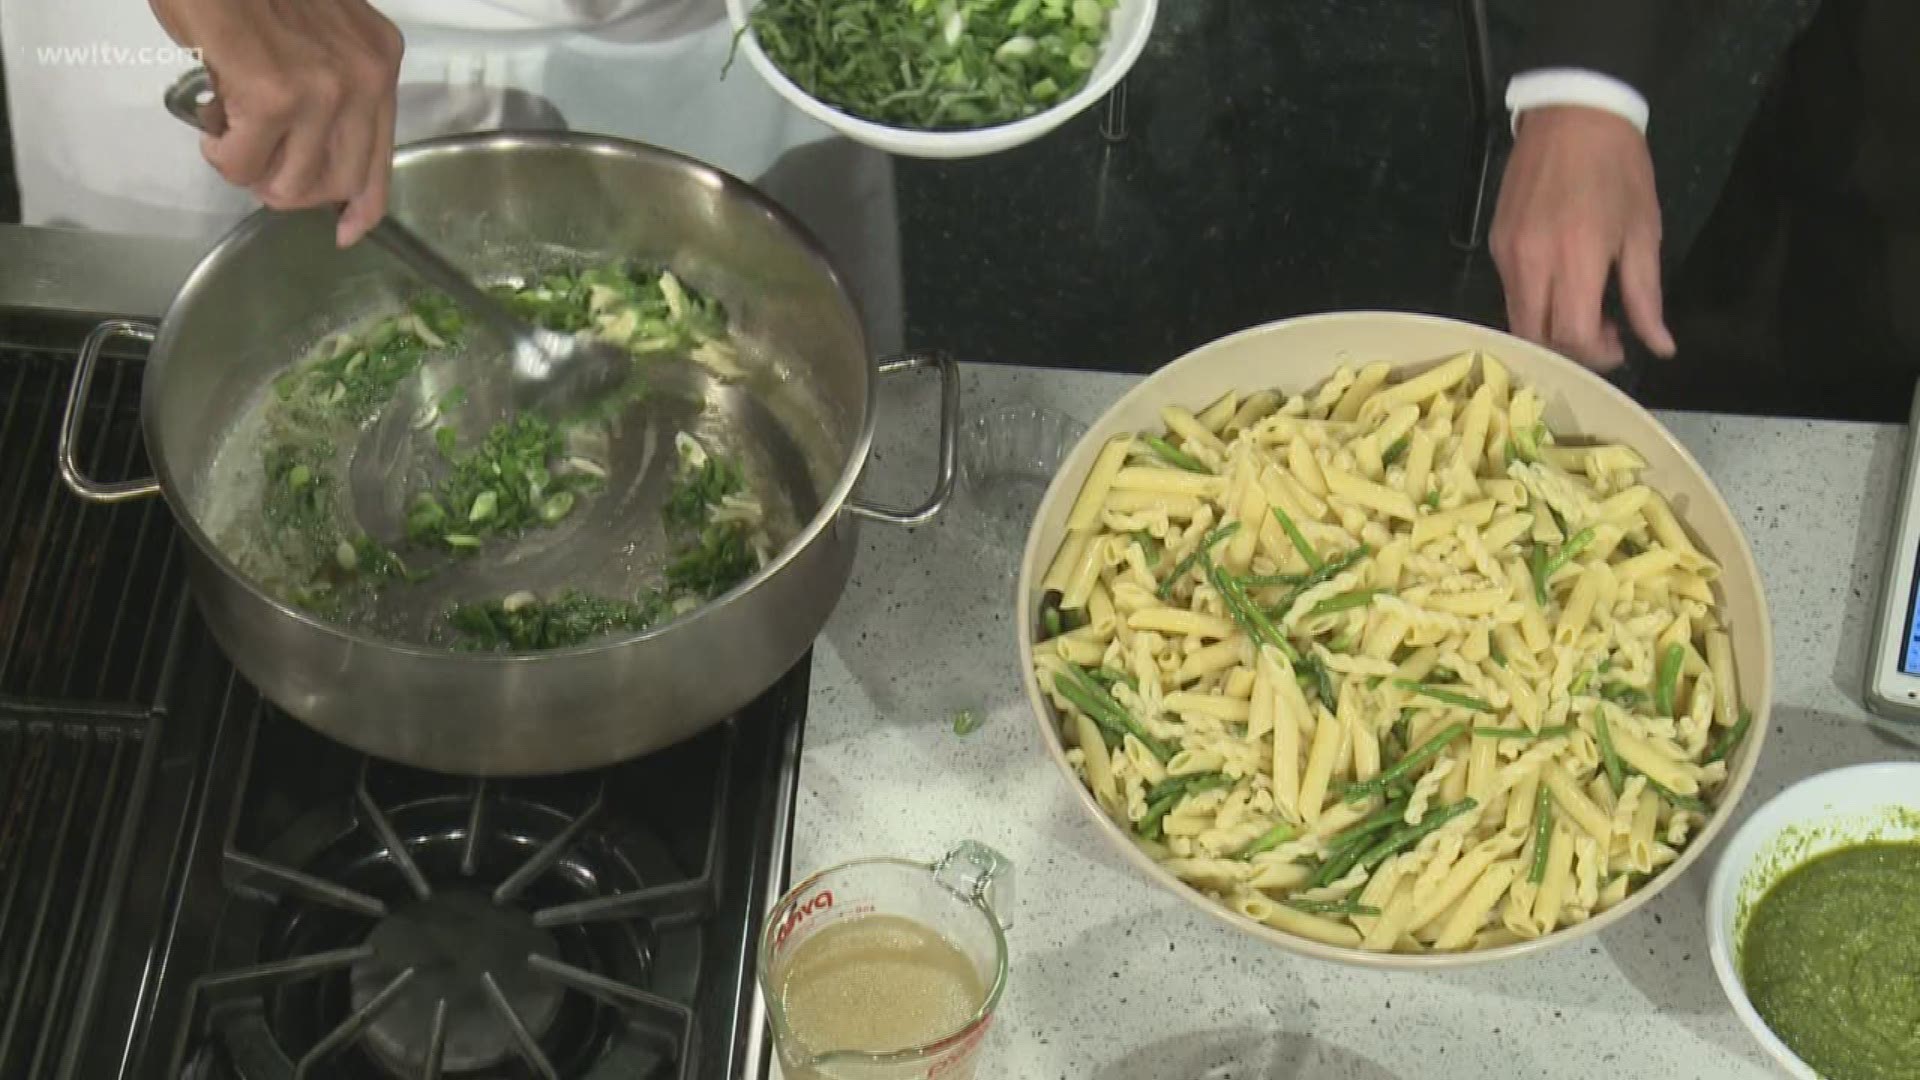 "Basil, Garlic...and drizzle in olive oil." That's the beginning of Chef Kevin Belton's pesto recipe. He shows Eric Paulsen how to put it all together.